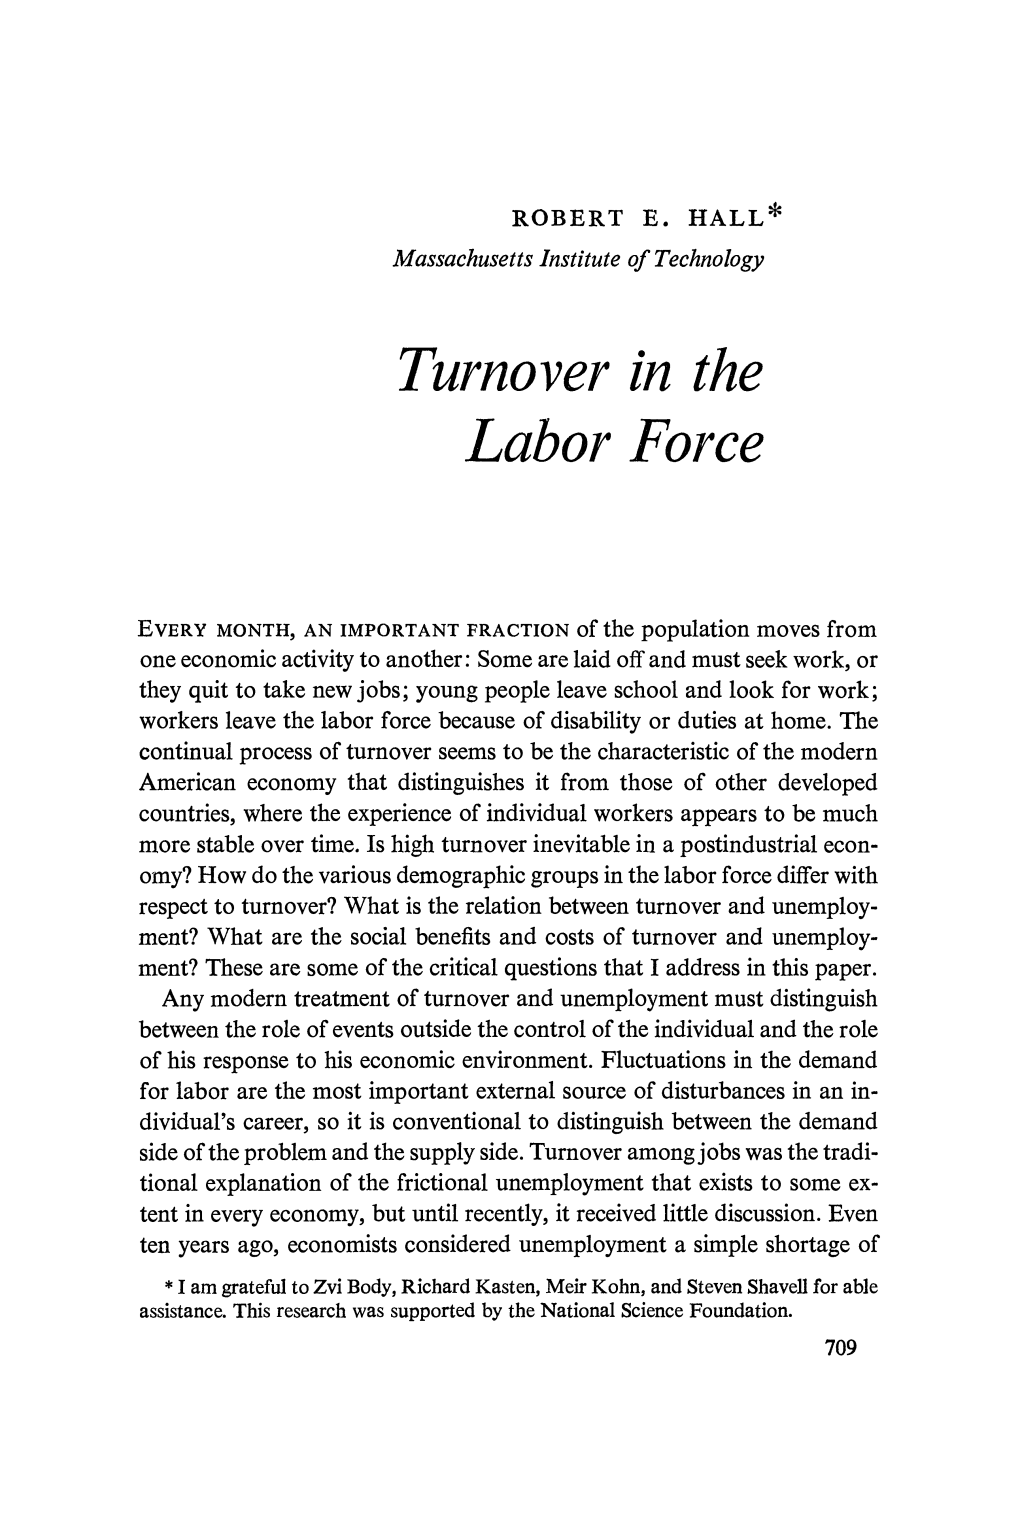 Turnover in the Labor Force